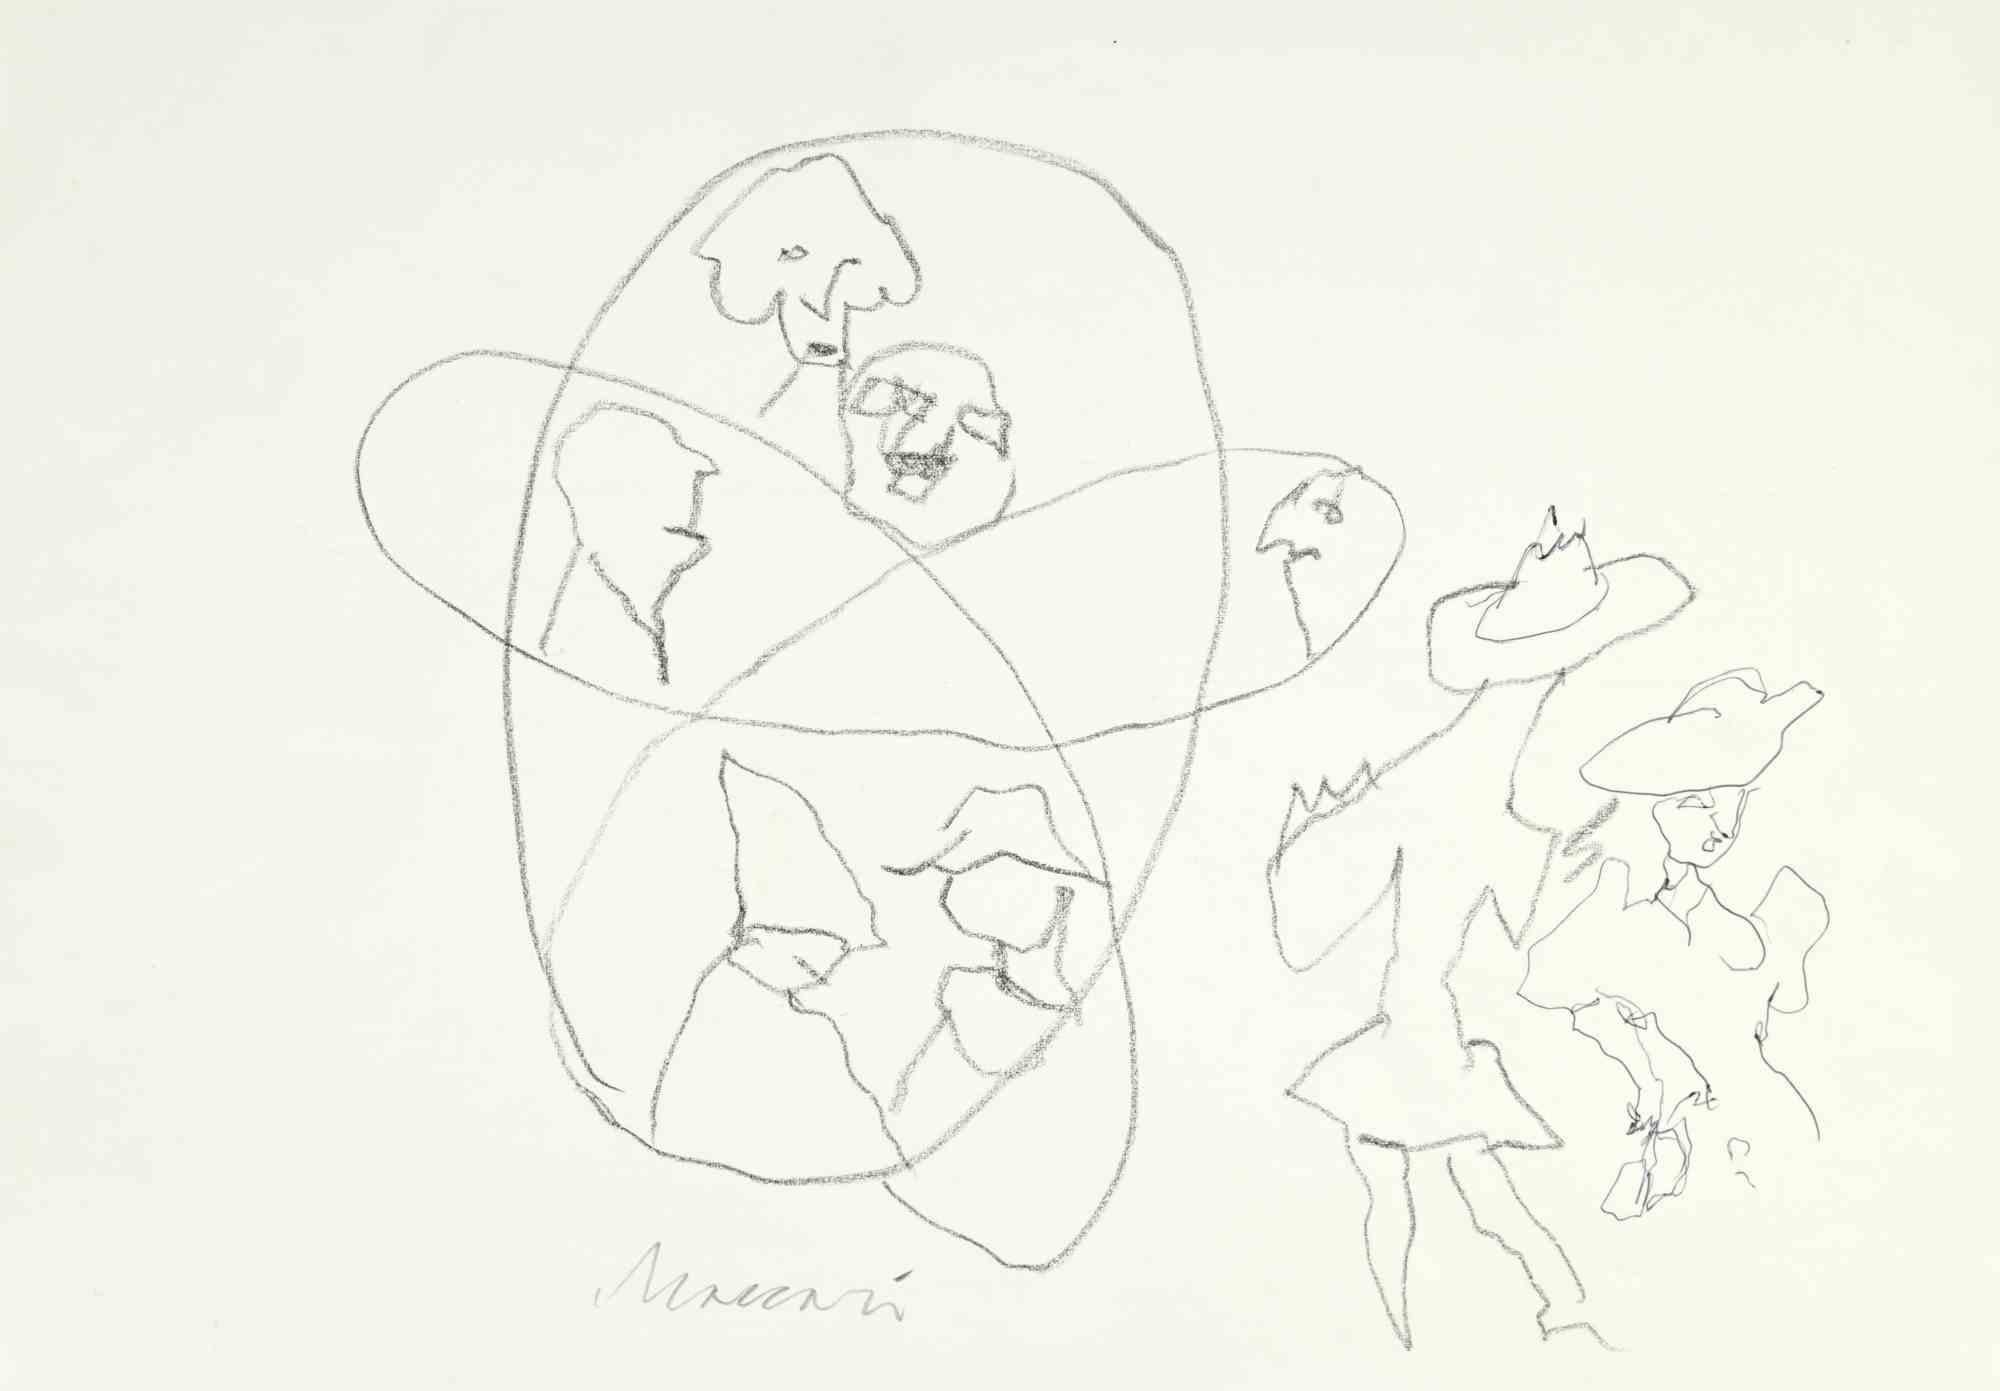 Atomic Dance is a Pencil Drawing realized by Mino Maccari  (1924-1989) in the 1960s.

Hand-signed on the lower.

Good condition.

Mino Maccari (Siena, 1924-Rome, June 16, 1989) was an Italian writer, painter, engraver and journalist, winner of the